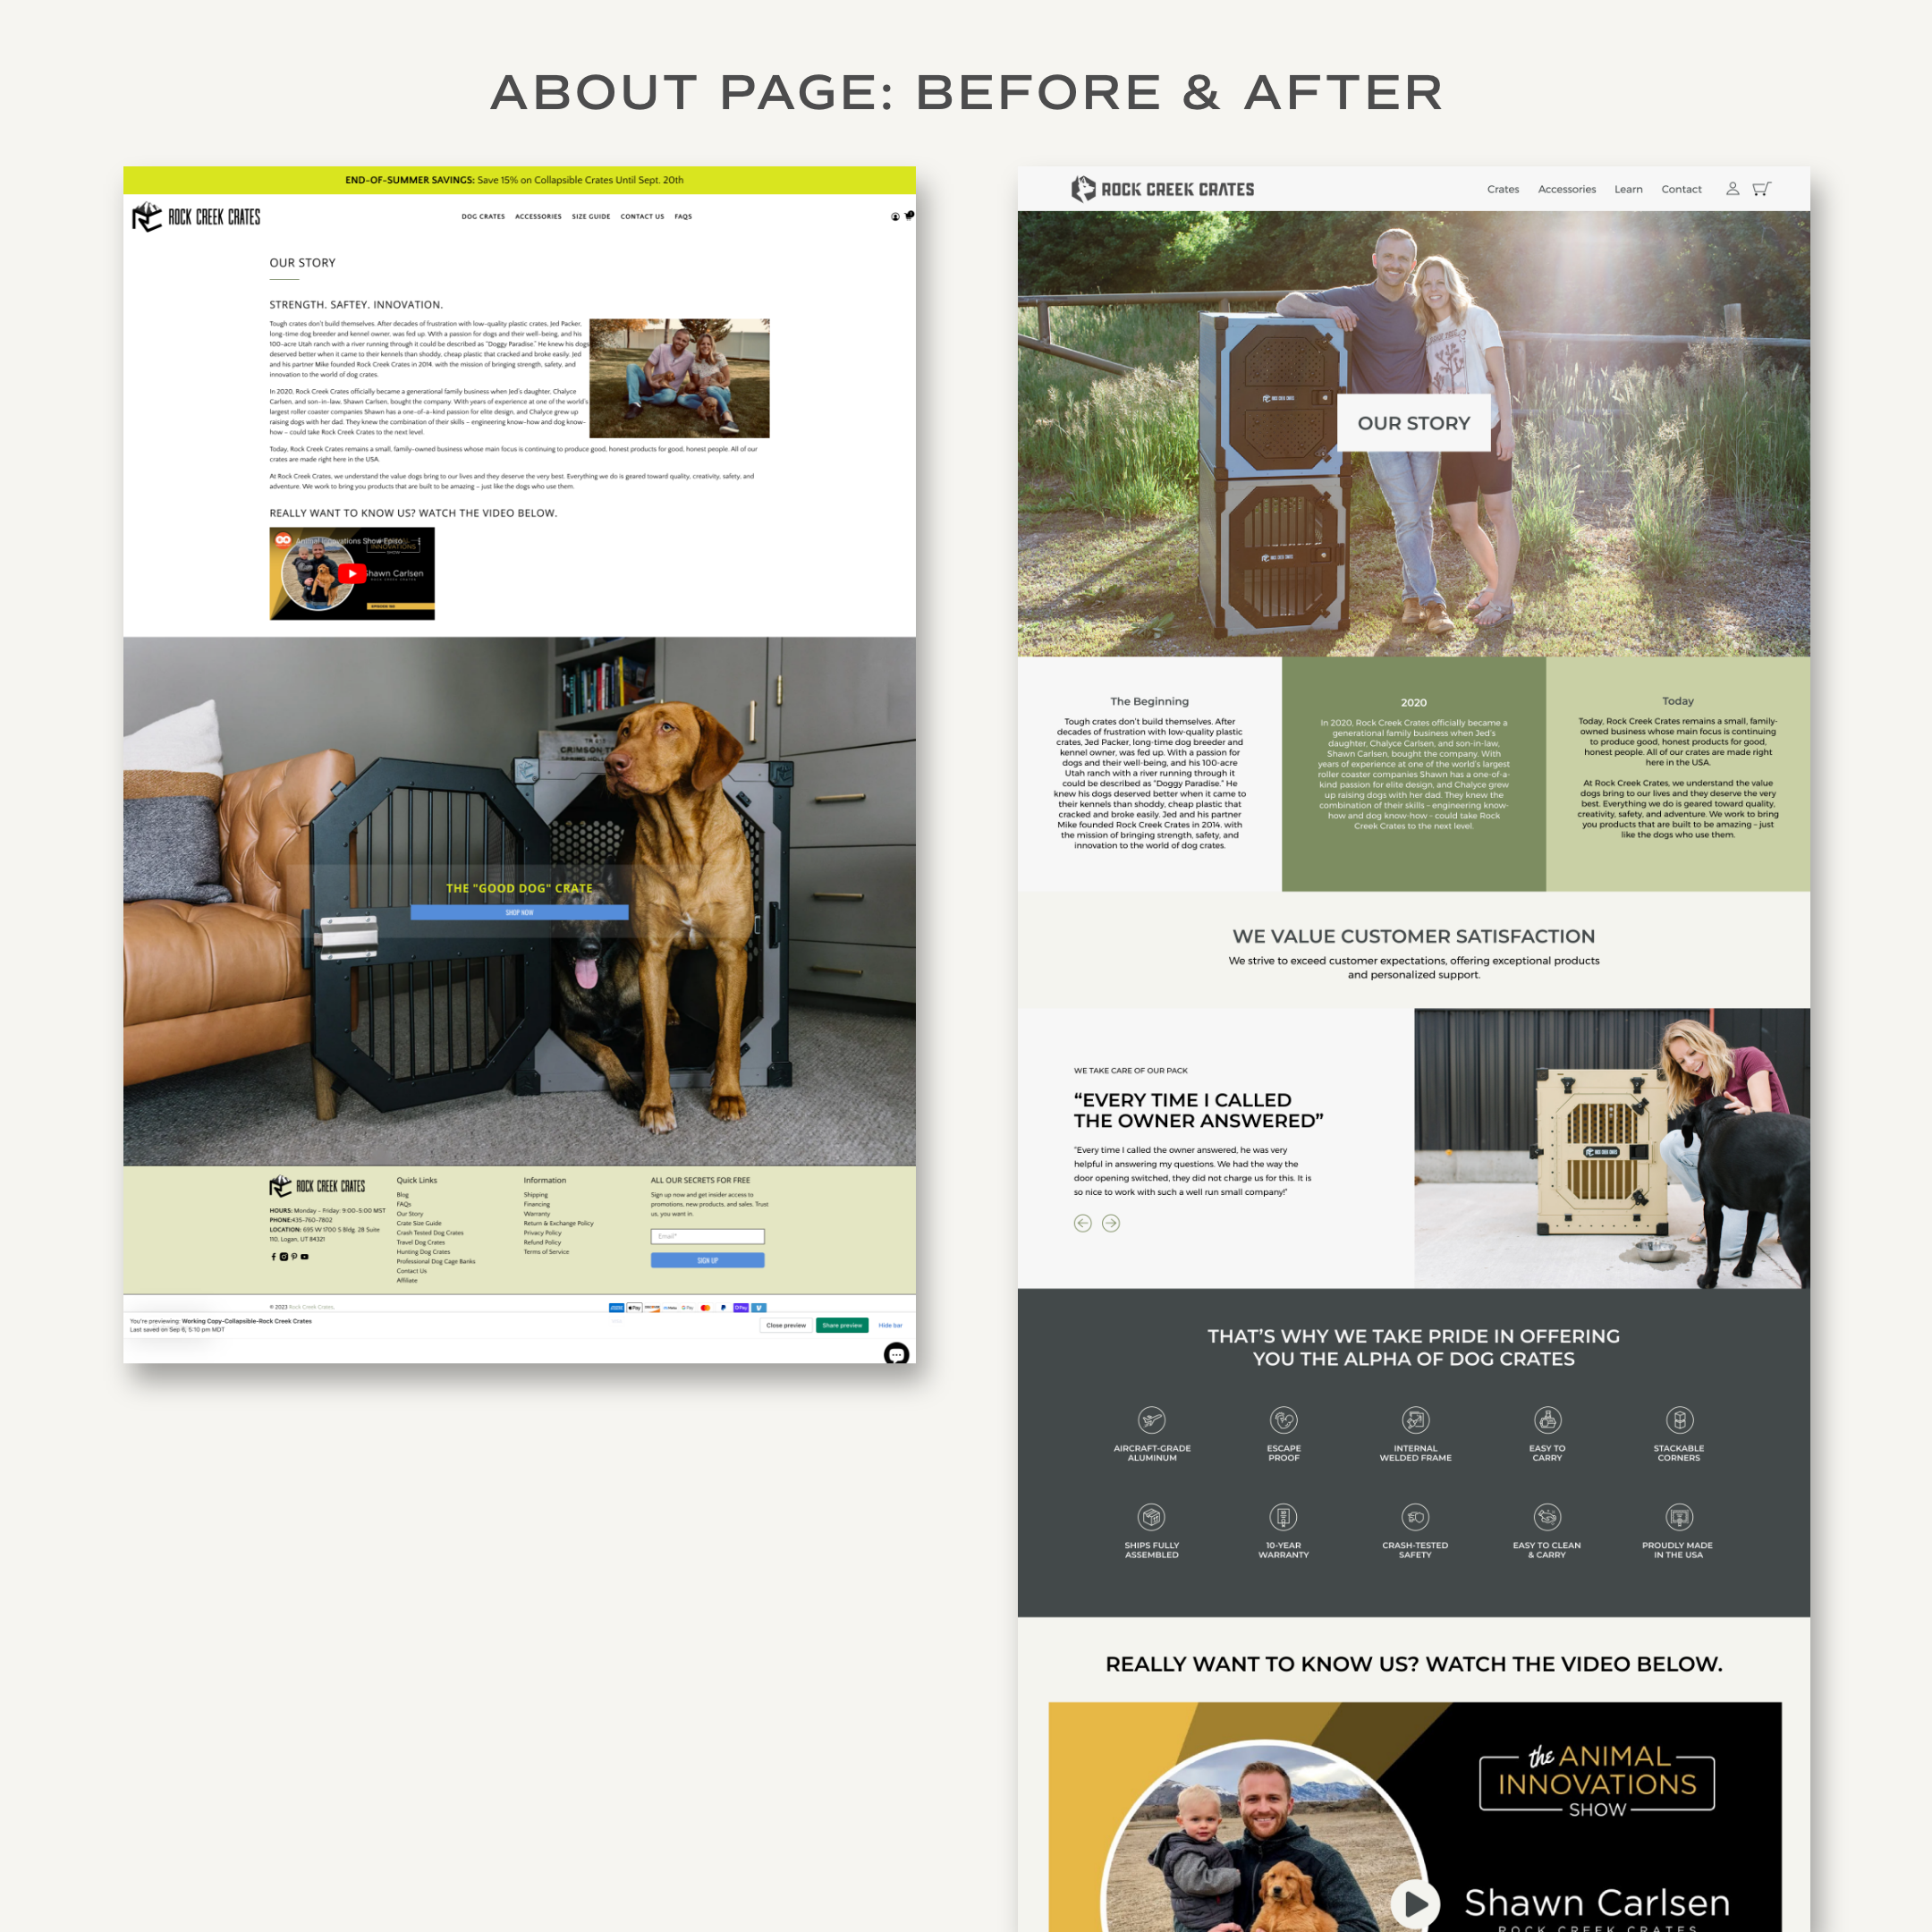 WildHIve-Studio_Rock-Creek-Crates_branding-and-Shopify-website-design-and-development_before-and-after_4.png